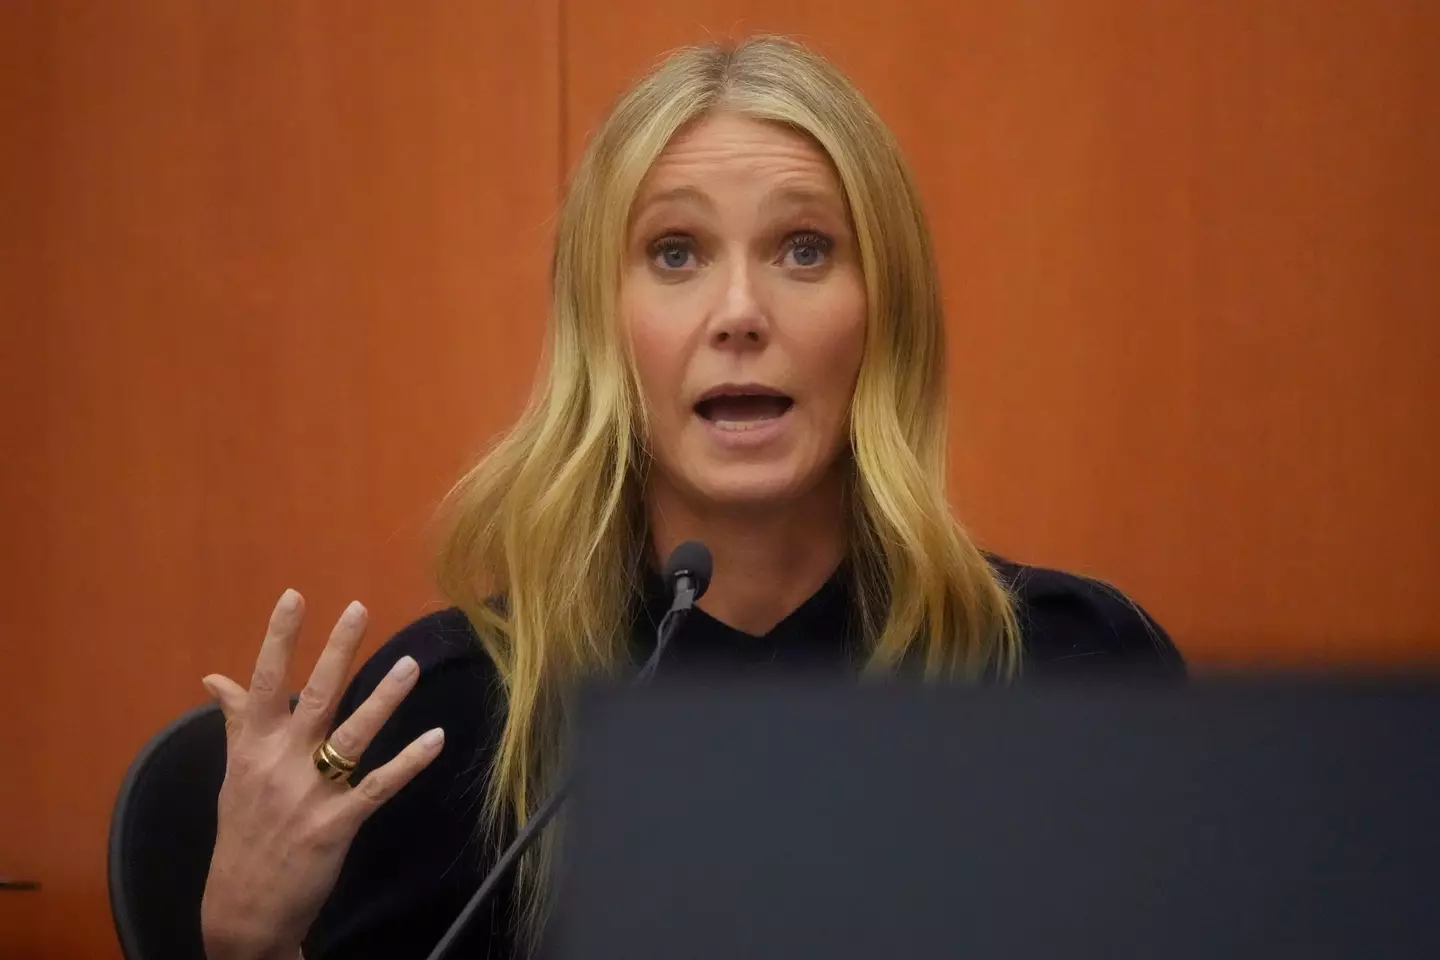 Paltrow testified that she felt 'a body pressing against' her during the collision.